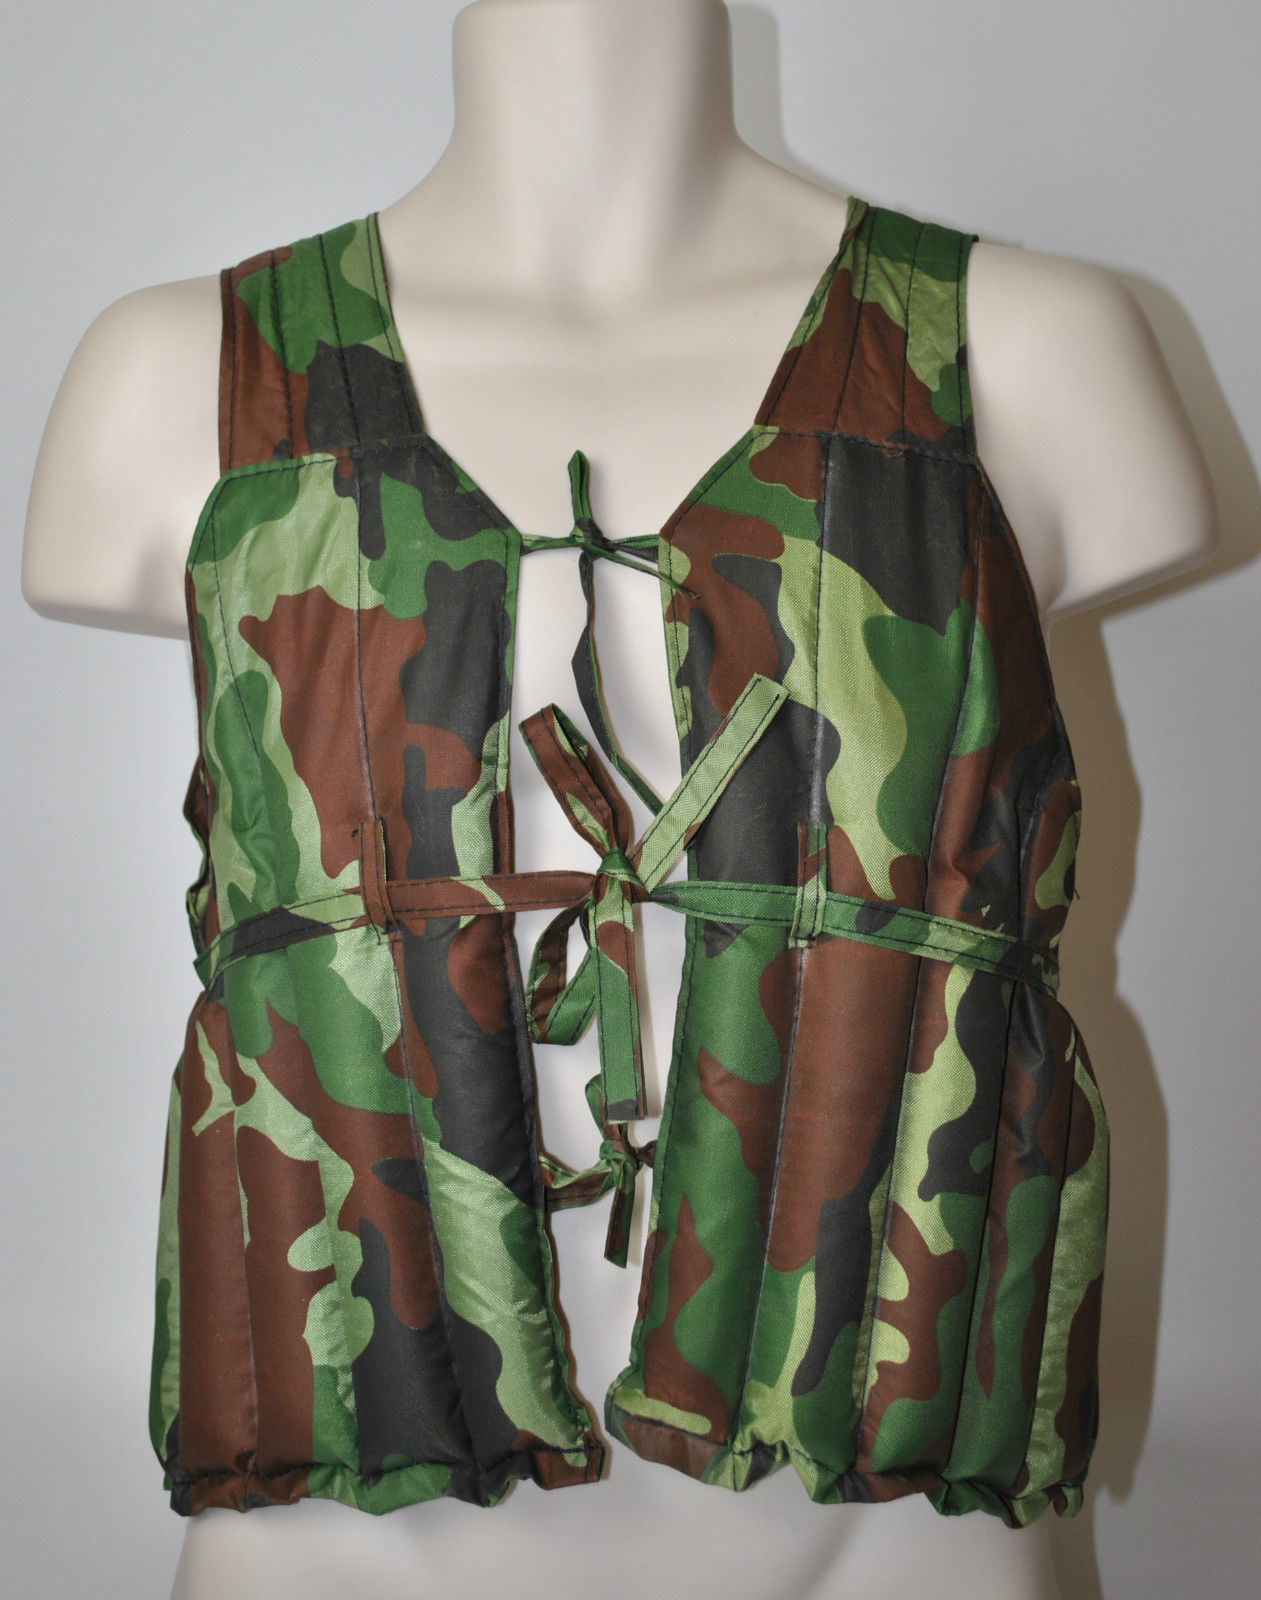 Beast Weighted Training Vest Camo Jacket 10KG